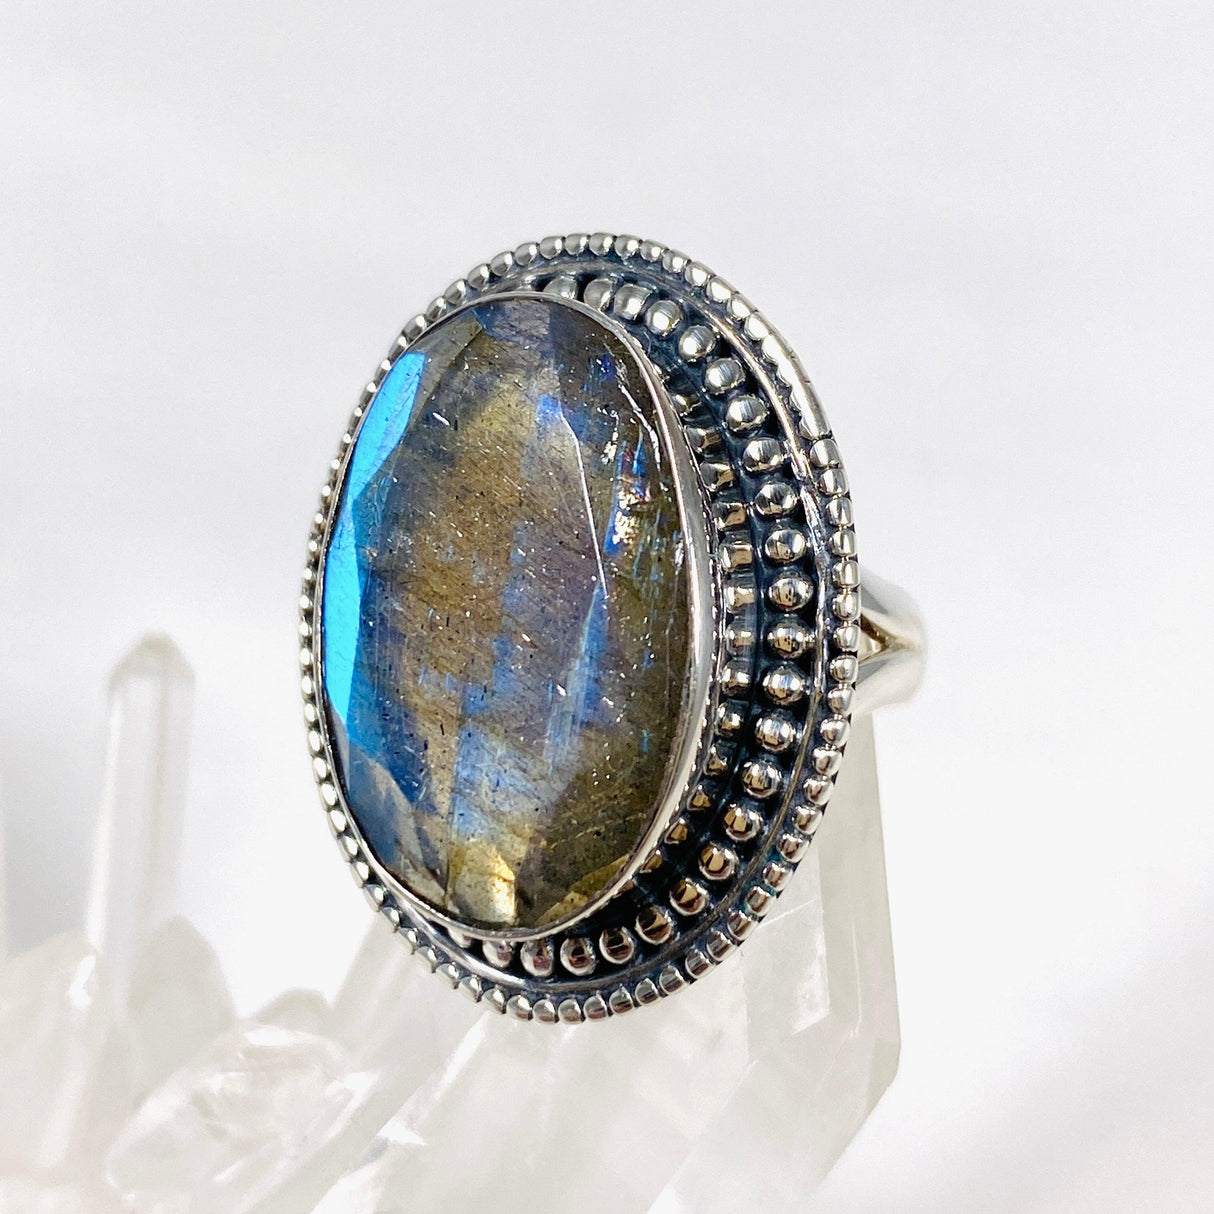 Blue iridescent Labradorite faceted gemstone ring set in silver on a clear quartz crystal